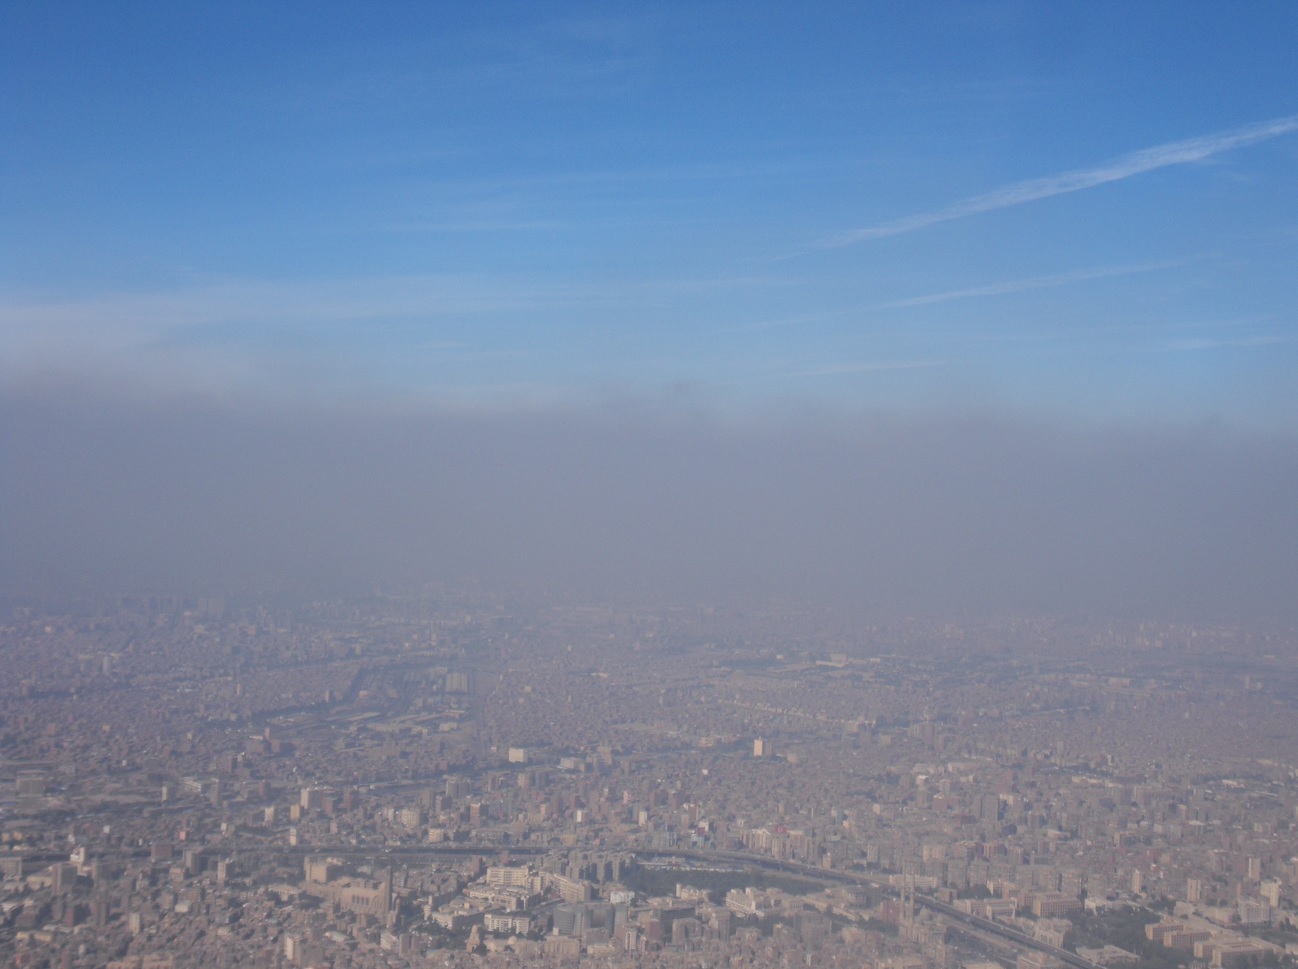 Black cloud as seen from an airplane over Cairo in 2013.